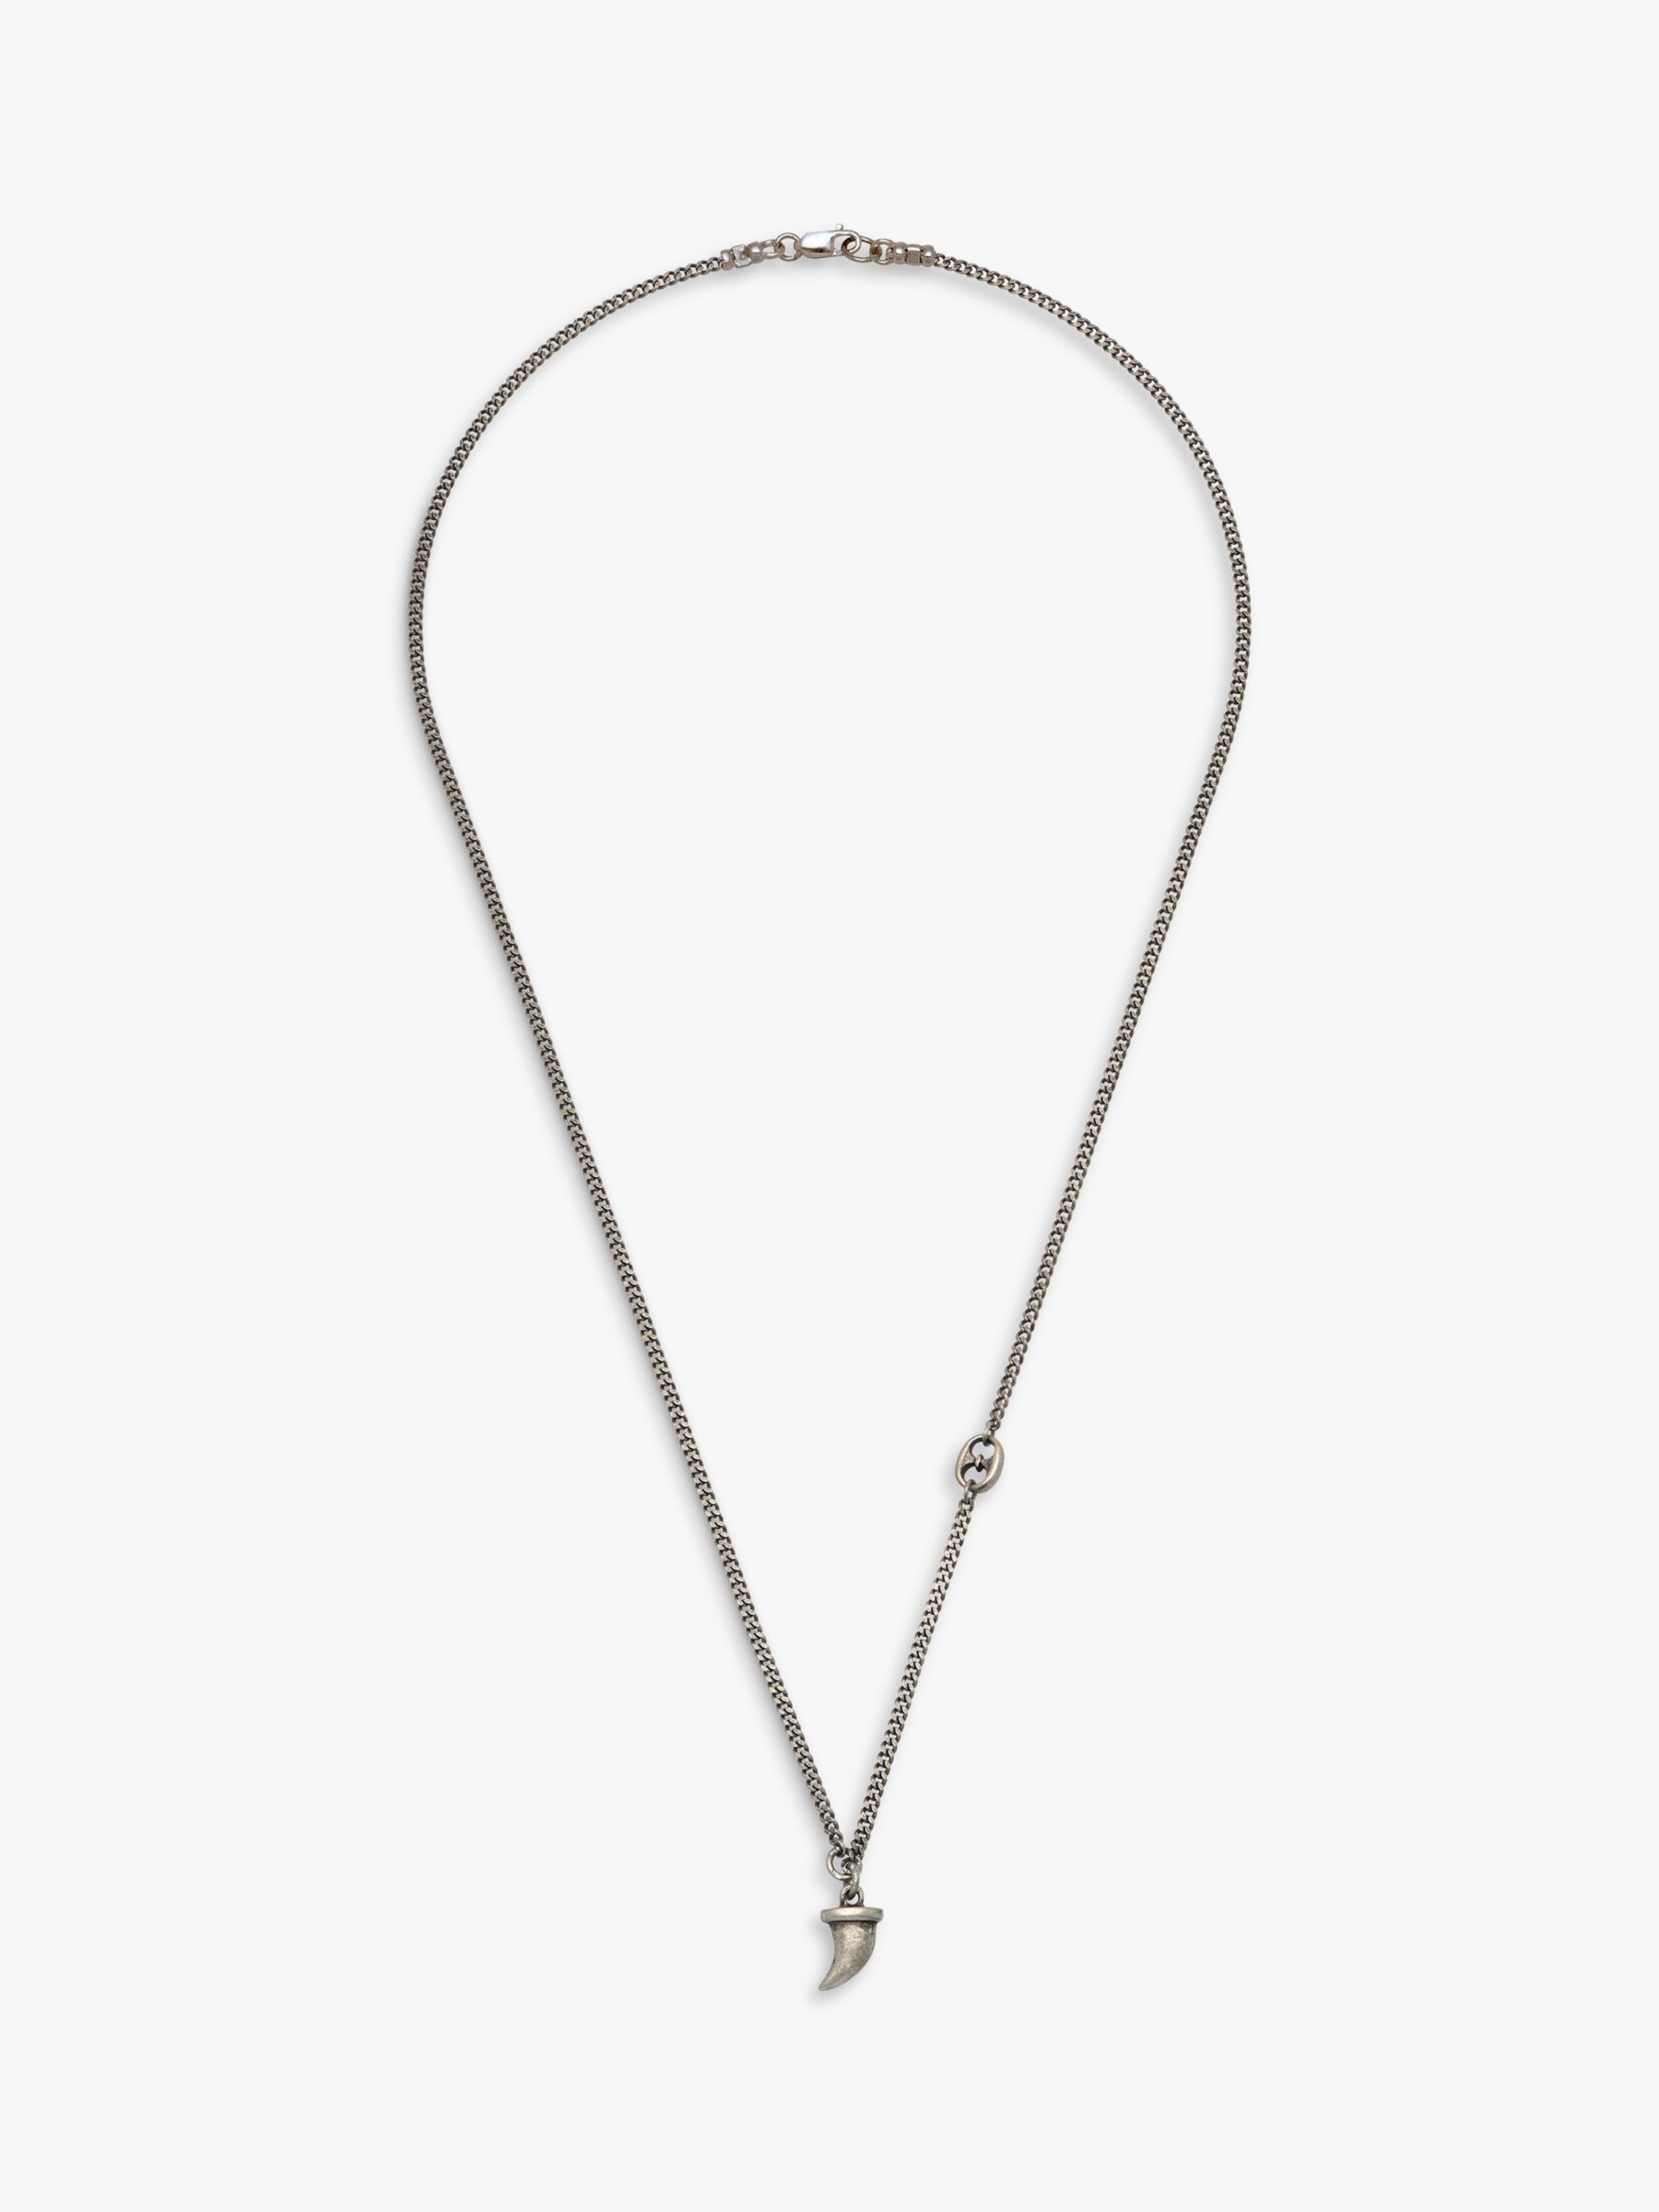 BARTLETT LONDON Men's Tooth Pendant Necklace, Silver at John Lewis ...